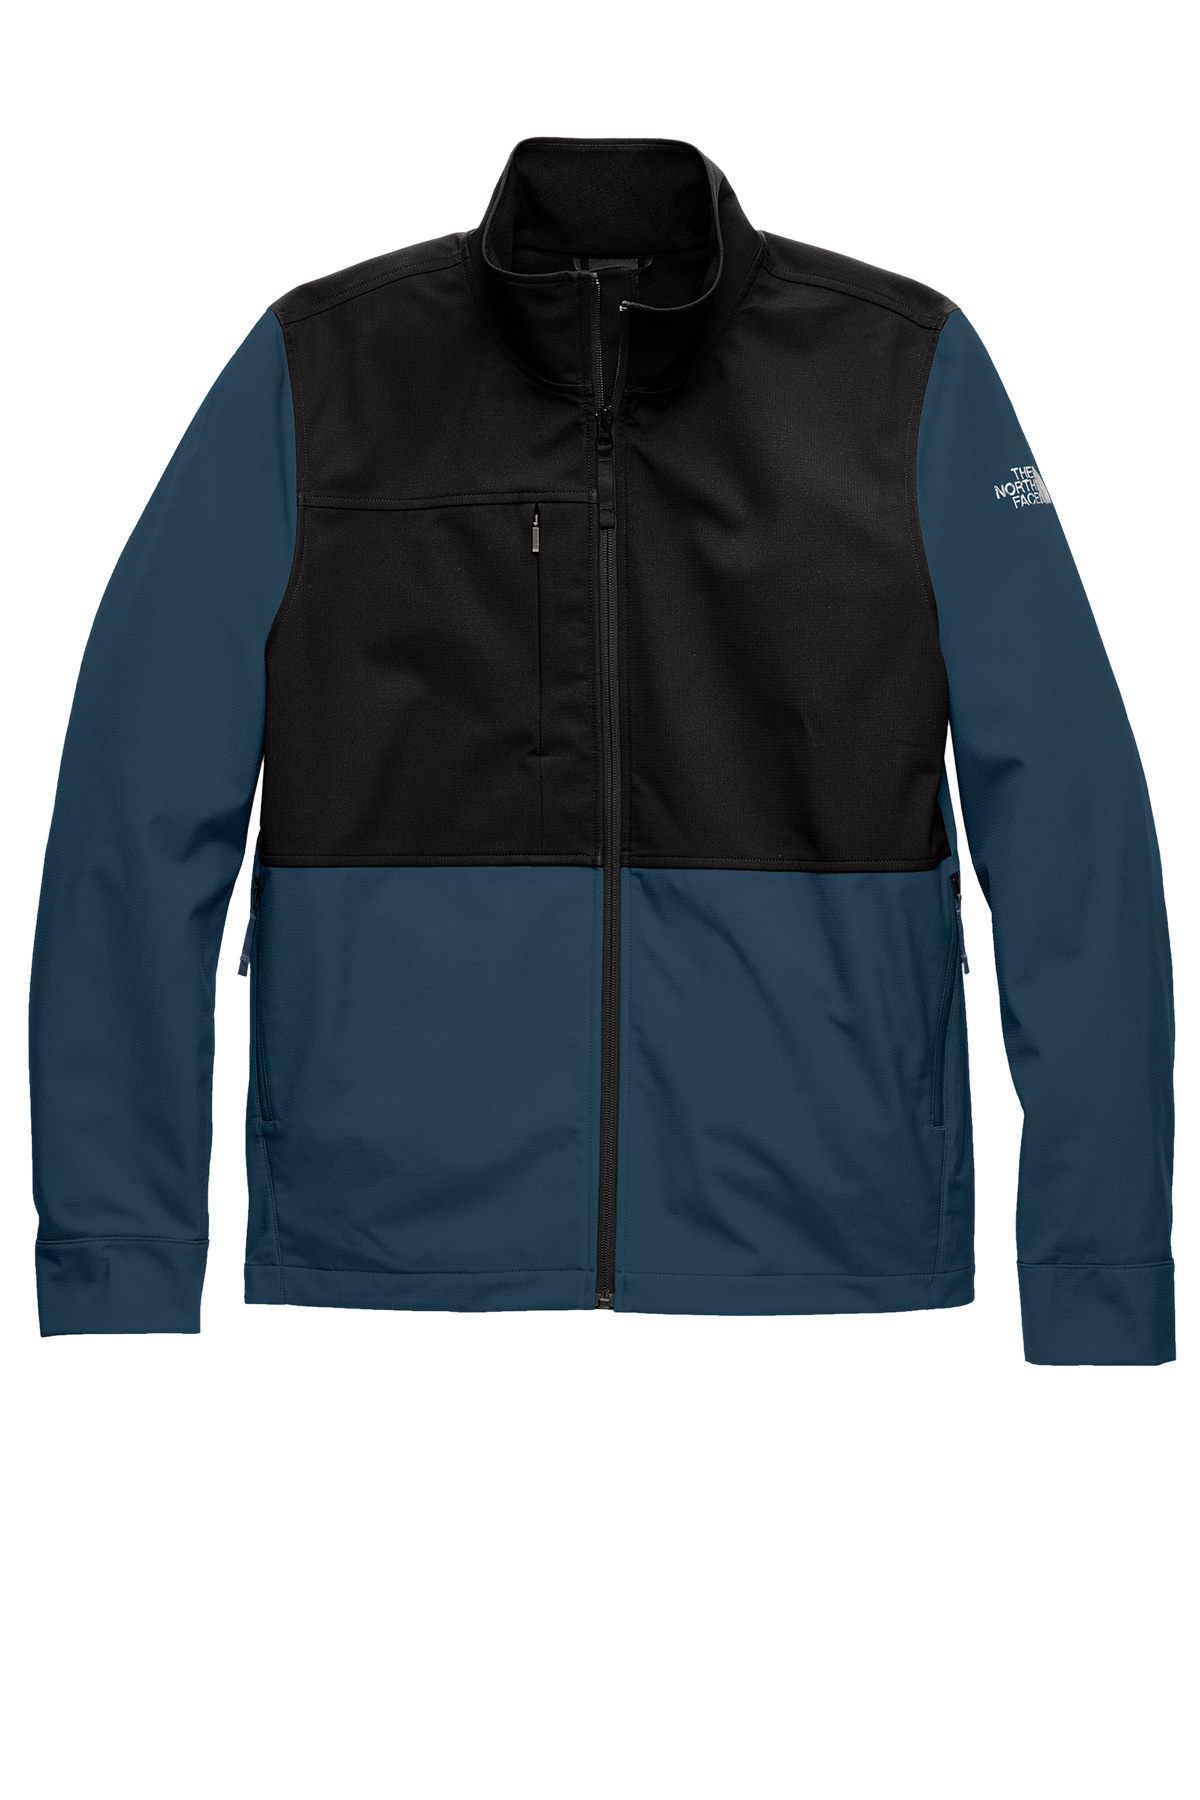 Custom Branded The North Face Branded Jackets & Vests Jackets - Blue Wing